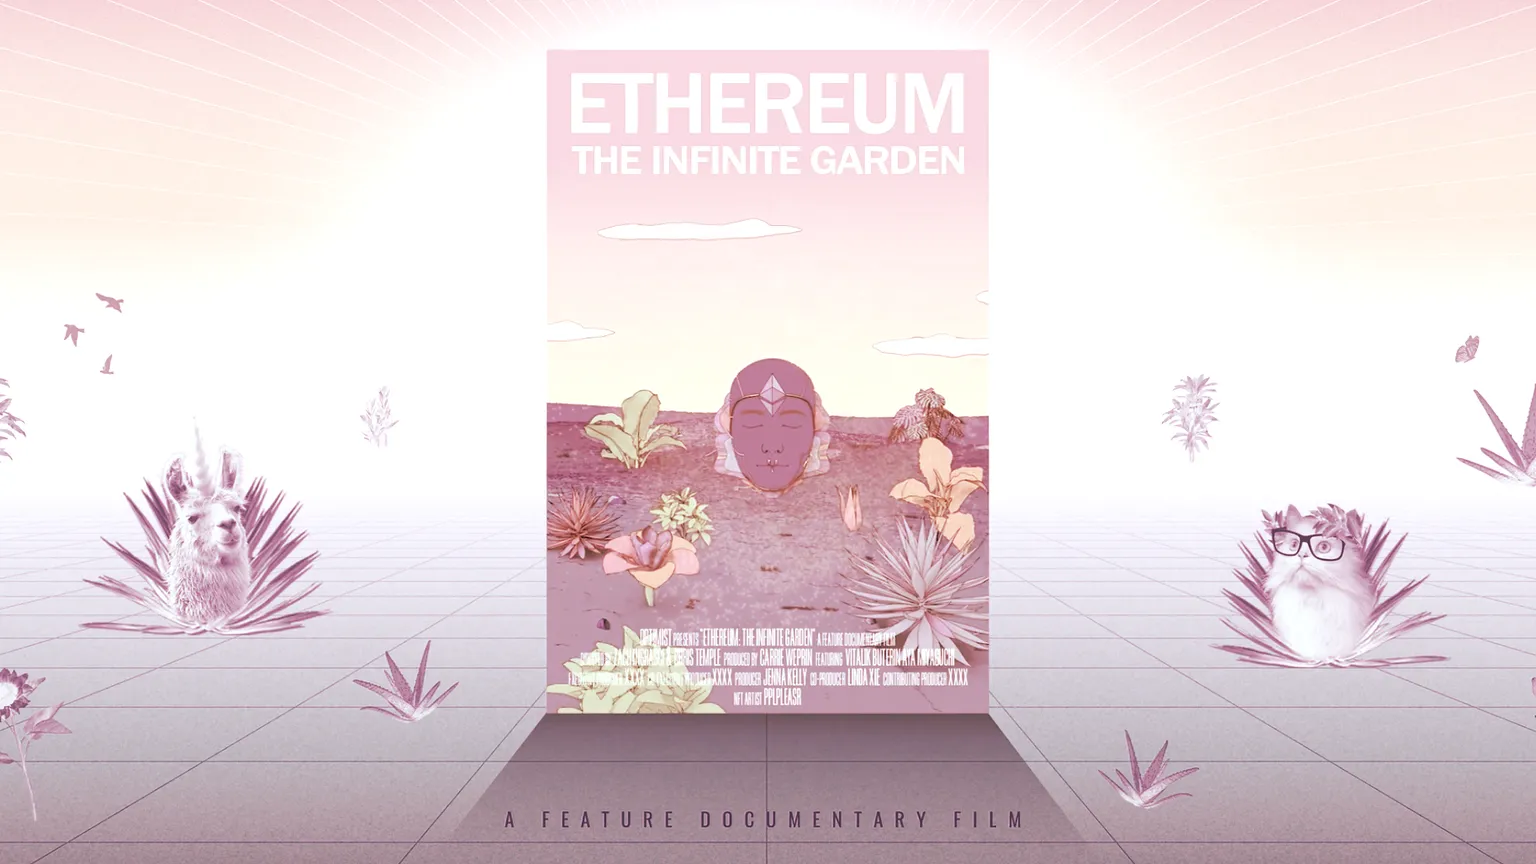 A documentary about the making of Ethereum has crowdfunded its way to millions in support. Image: Infinite Garden